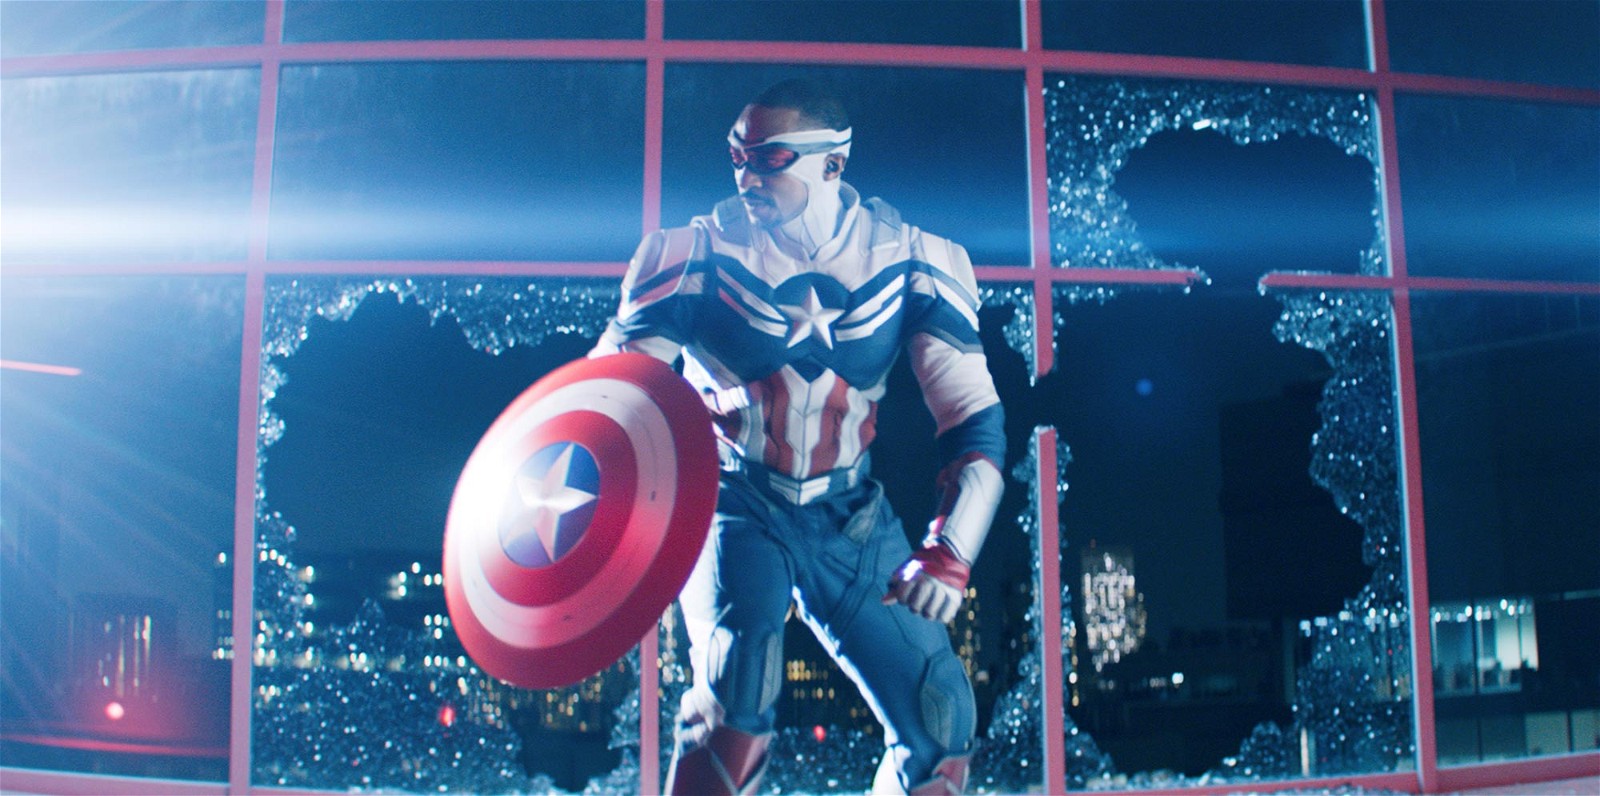 Anthony Mackie as Captain America in a still from Falcon and The Winter Soldier 